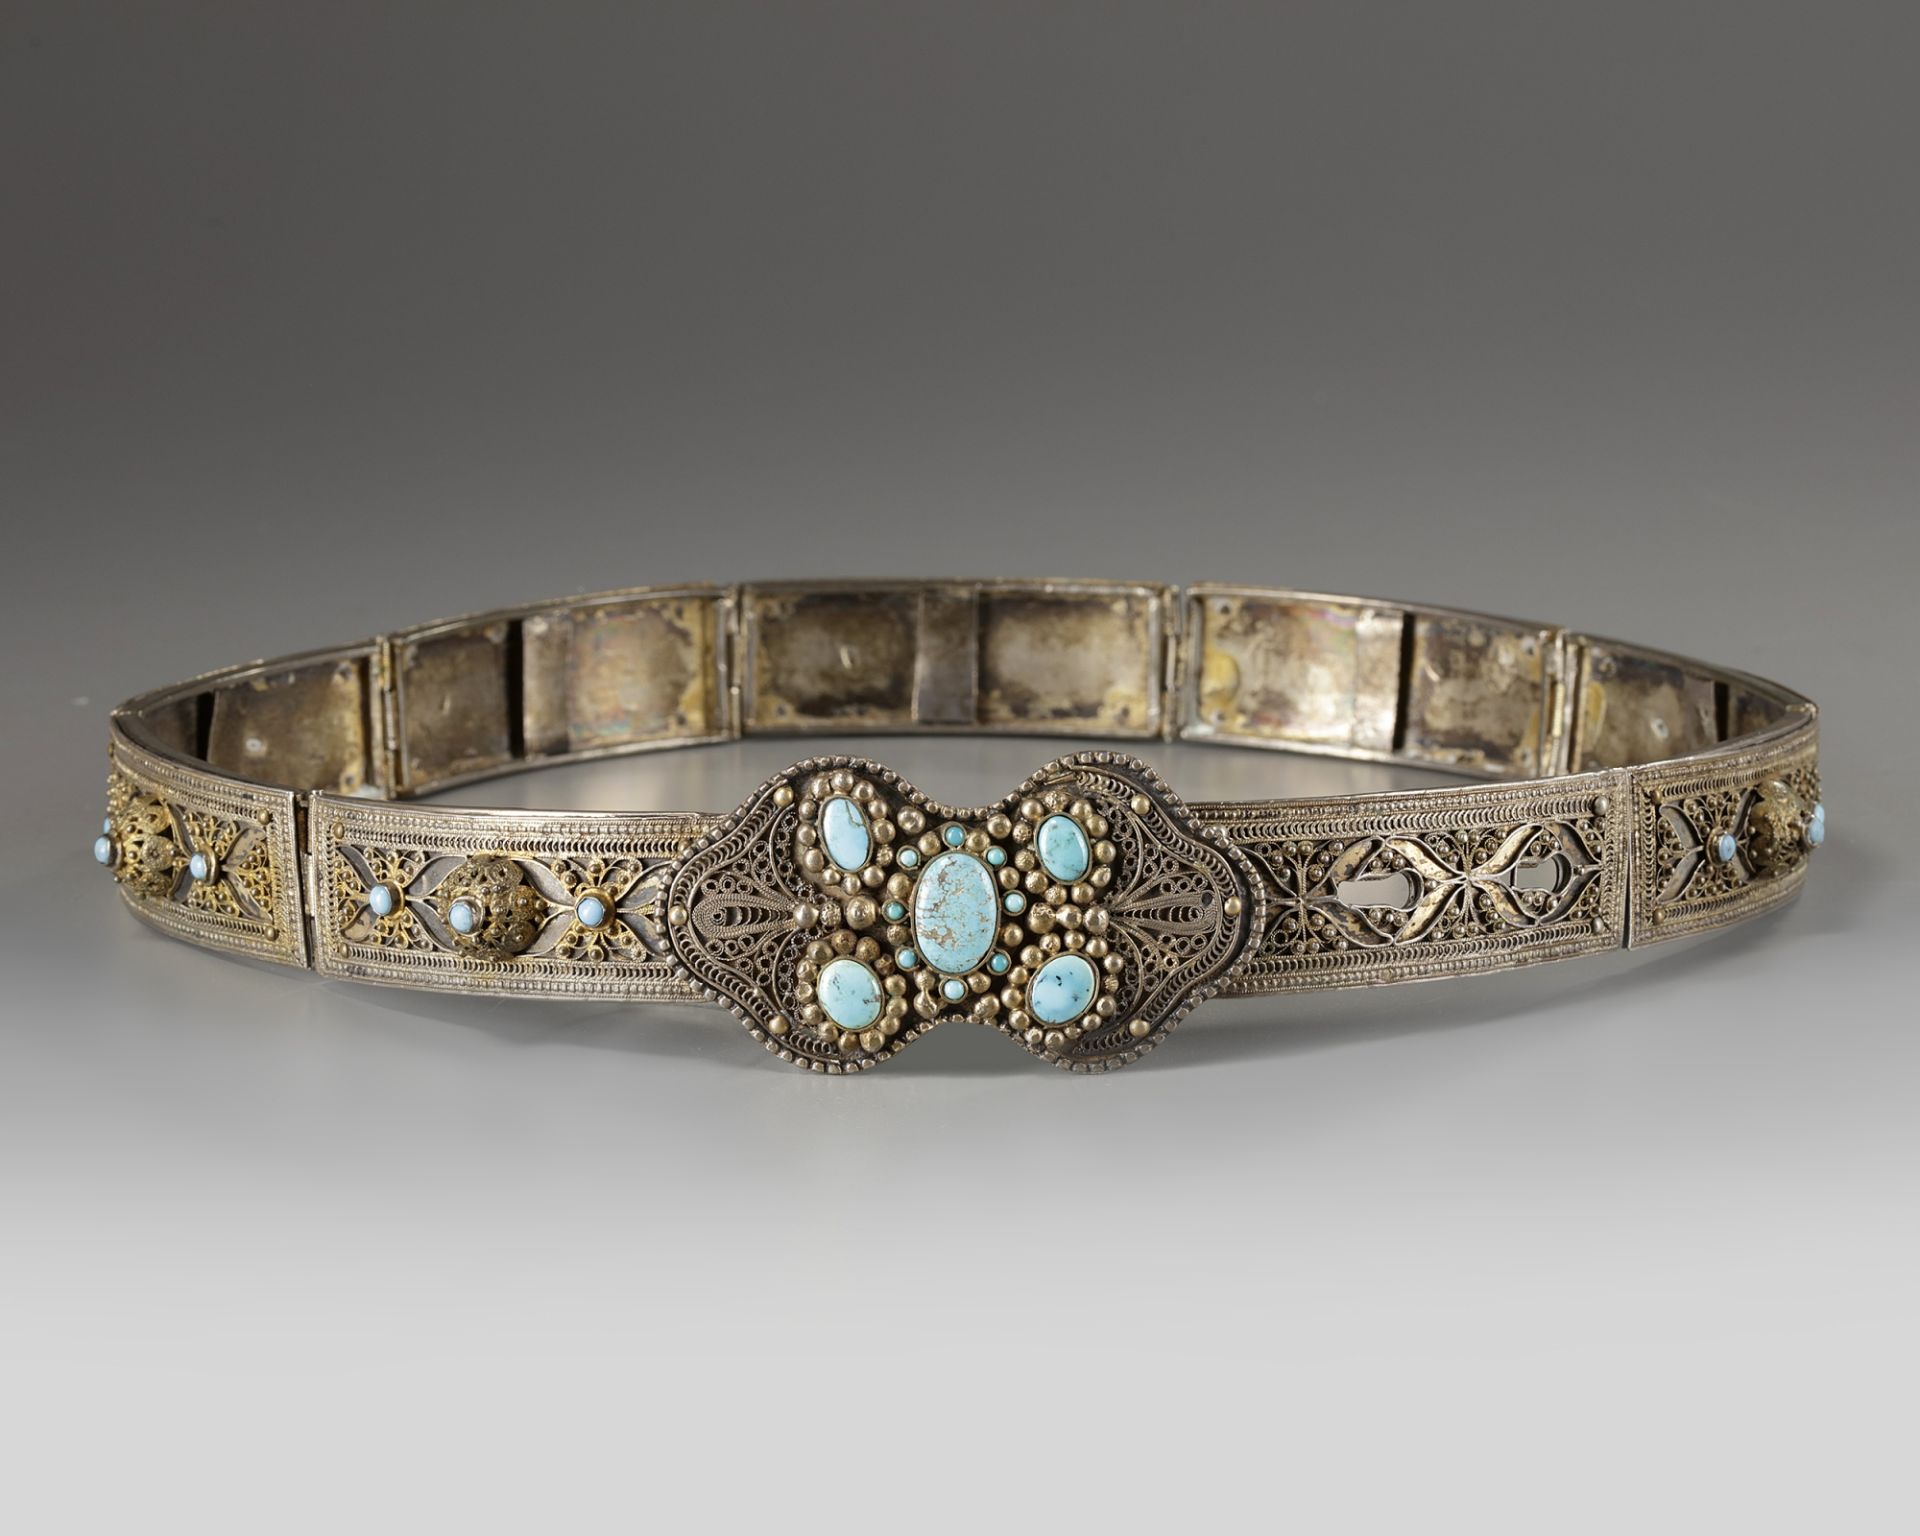 A silver and turqouise inlaid belt